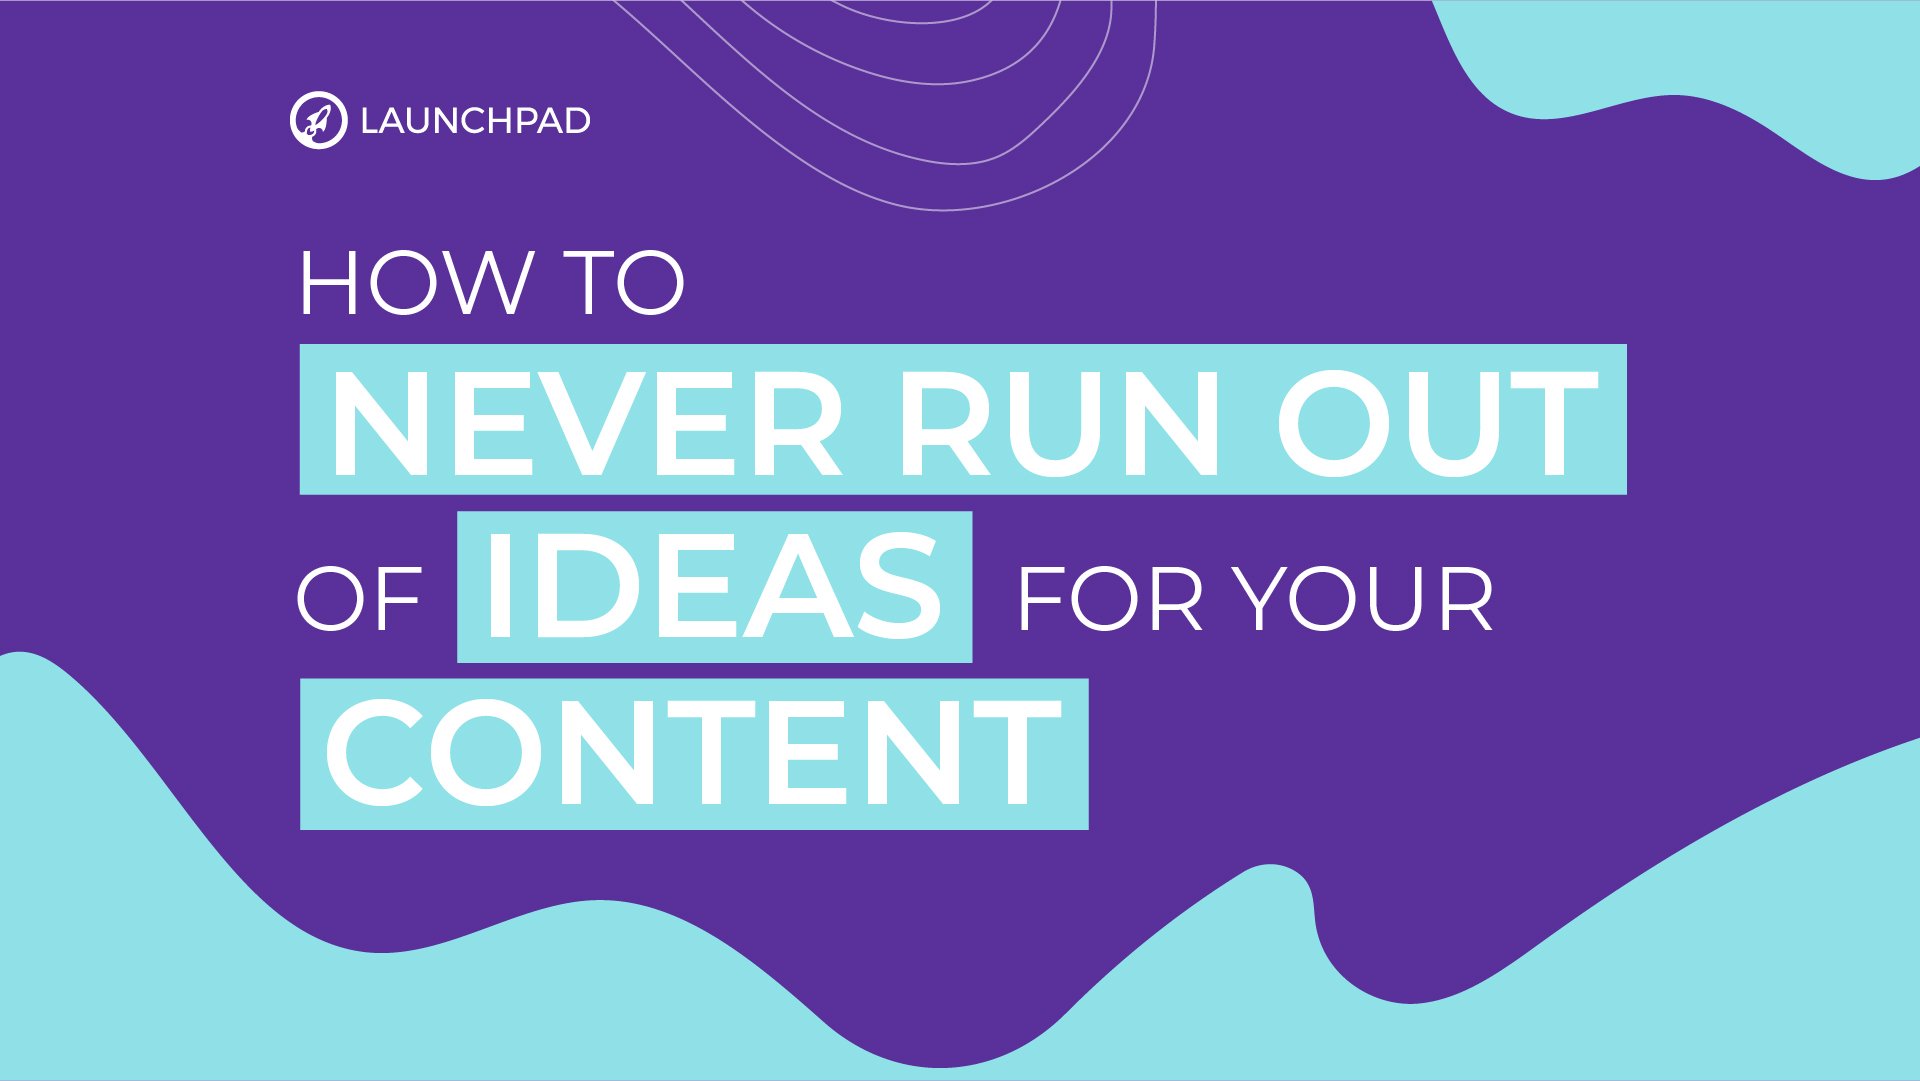 How to never run out of ideas for your content